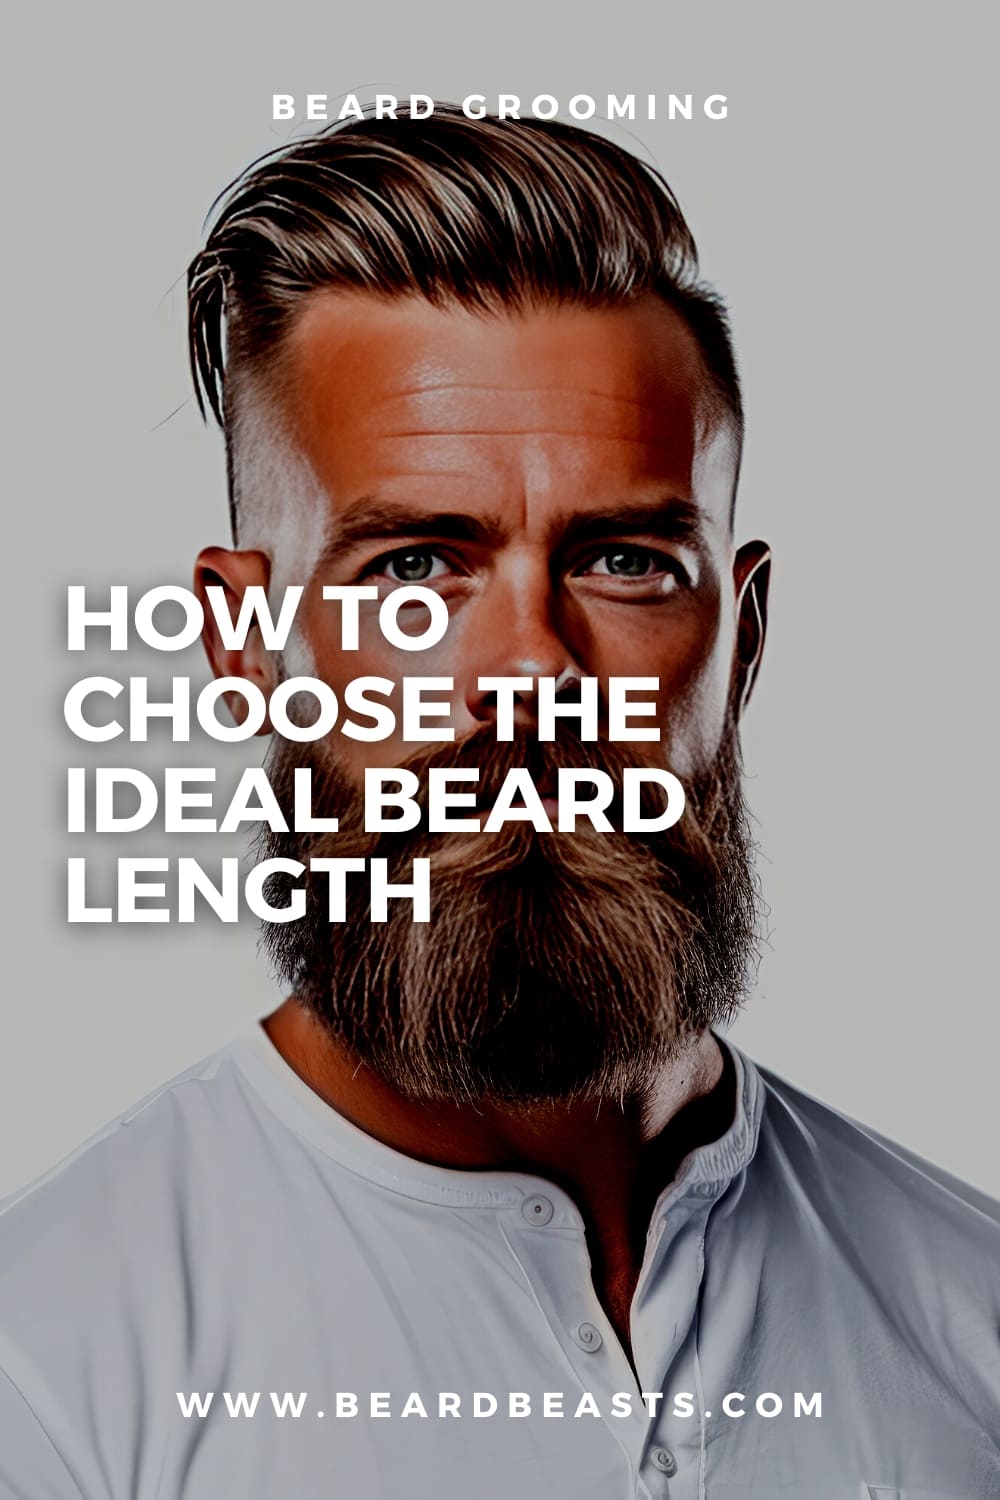 Stylish man with a full, groomed beard and sleek hairstyle featured on a promotional Pinterest pin for 'How to Choose the Ideal Beard Length' article on BeardBeasts.com.